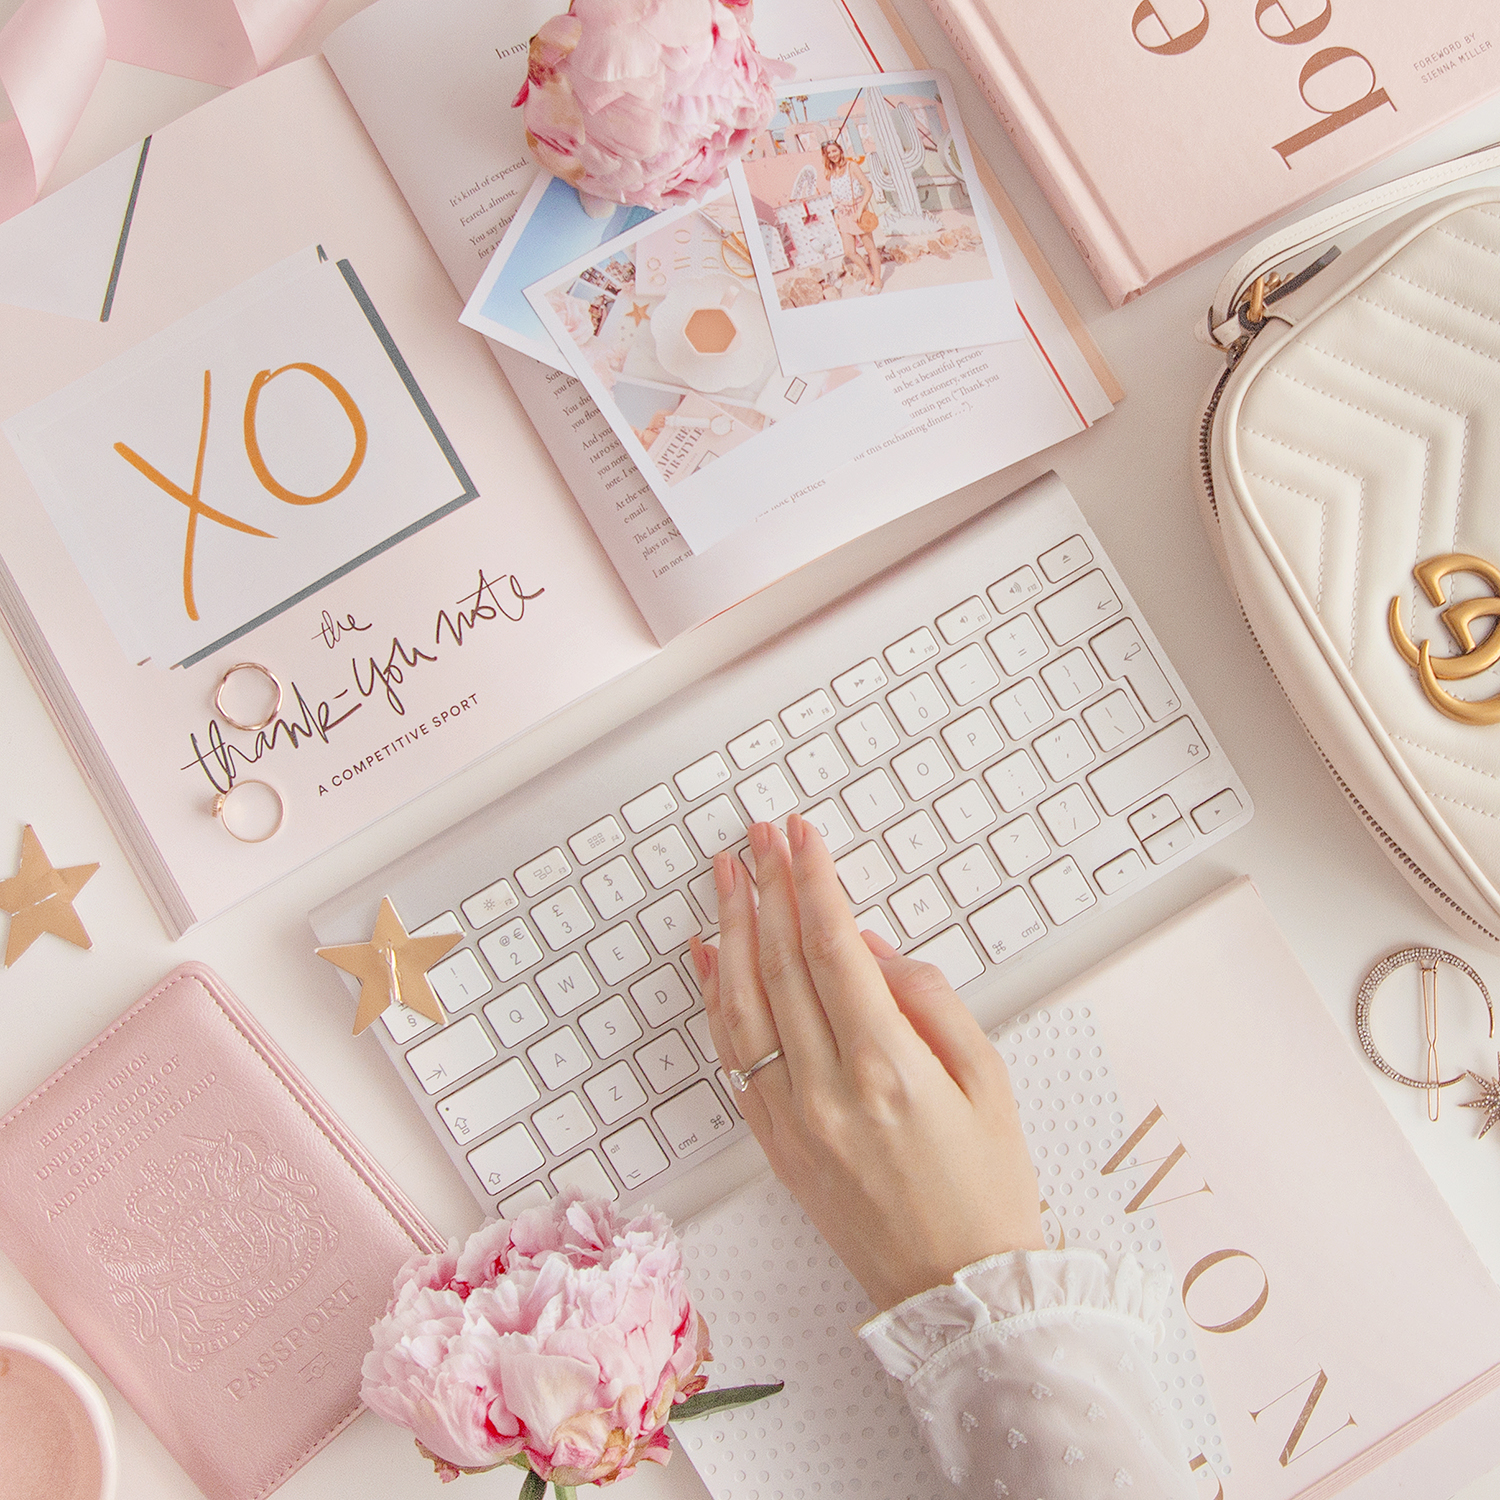 Flat lay image of a desk setup with pink accessories and flowers